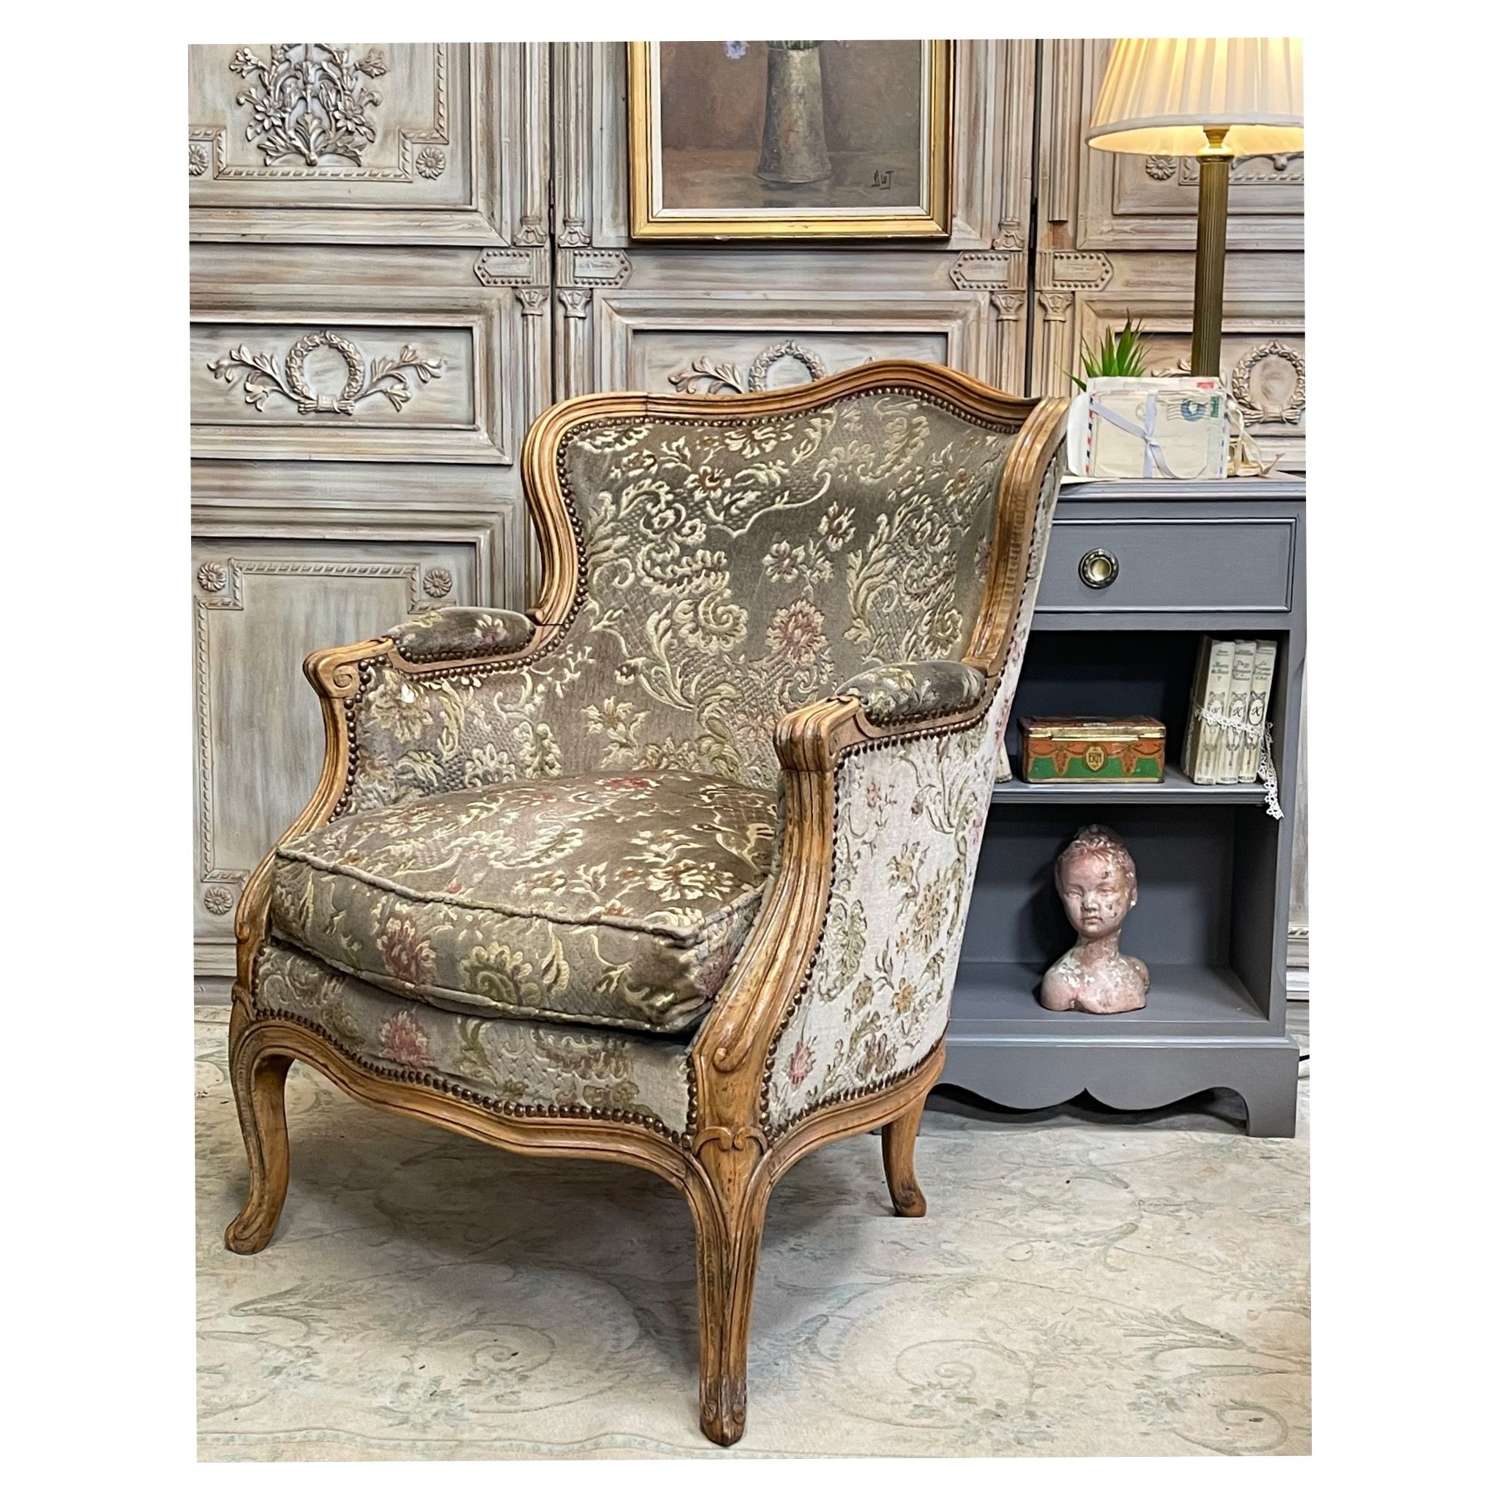 Vintage French armchair